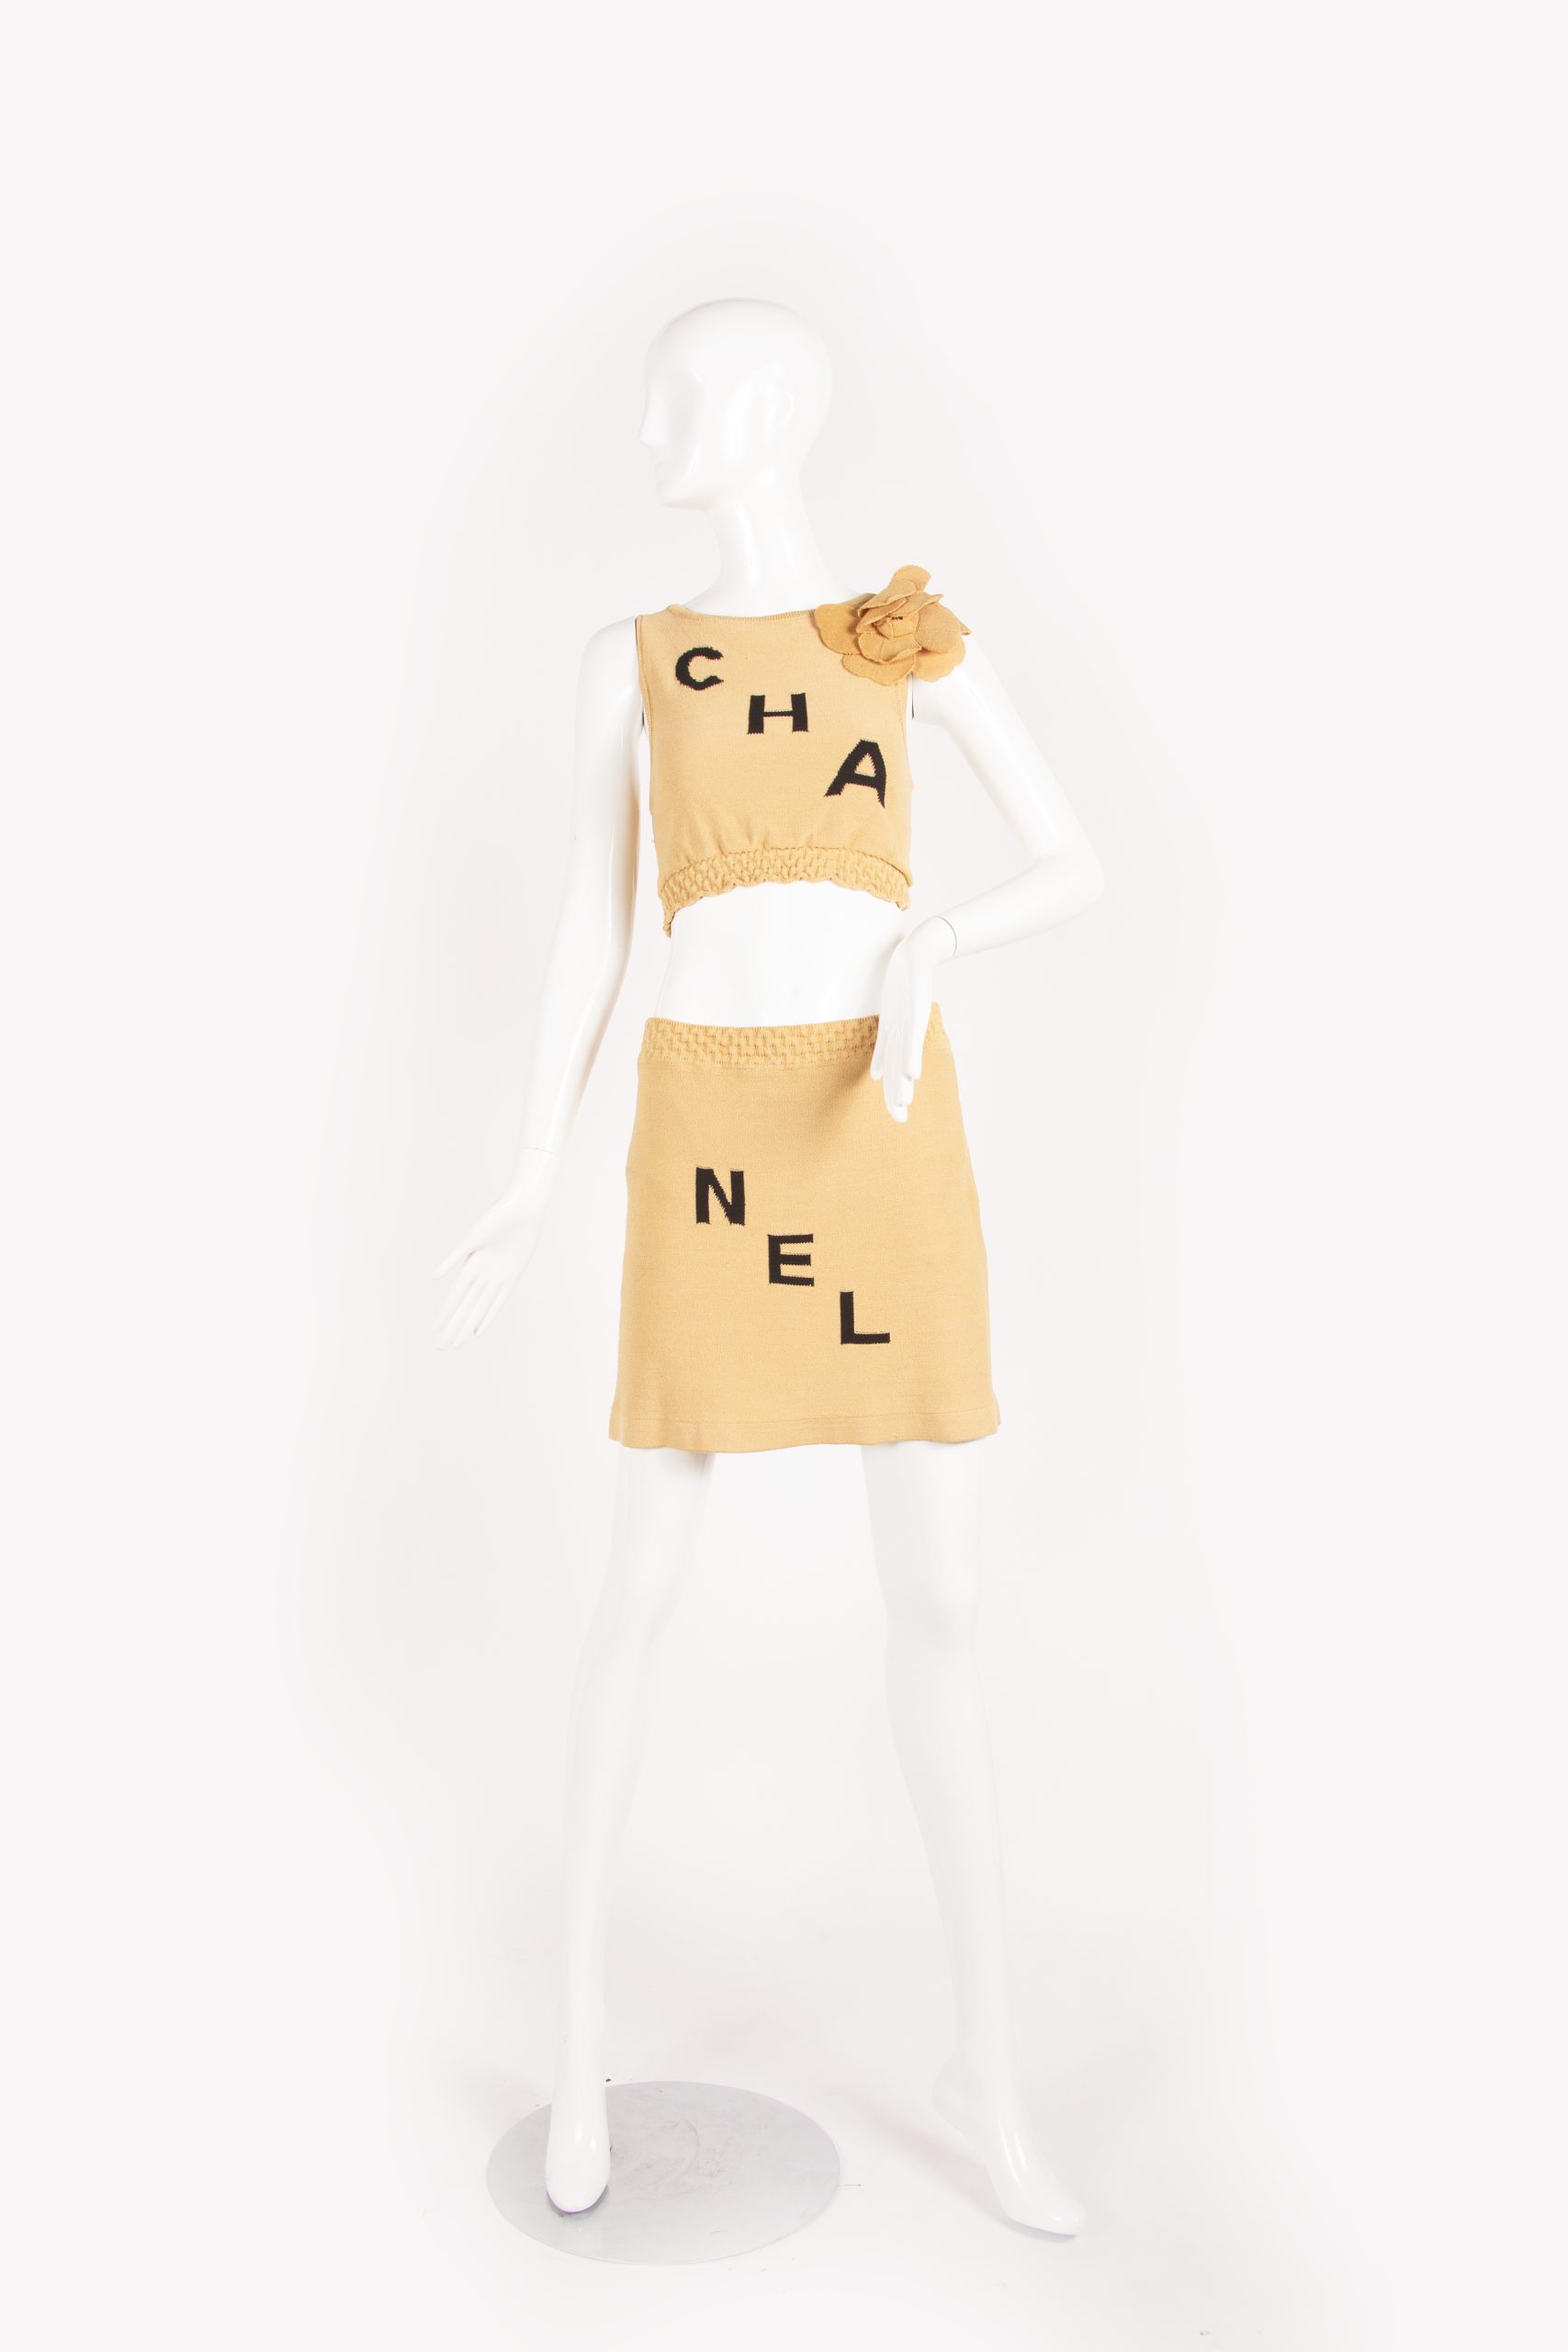 Chanel Two Piece-Emsemble and Camelia - Janet Mandell